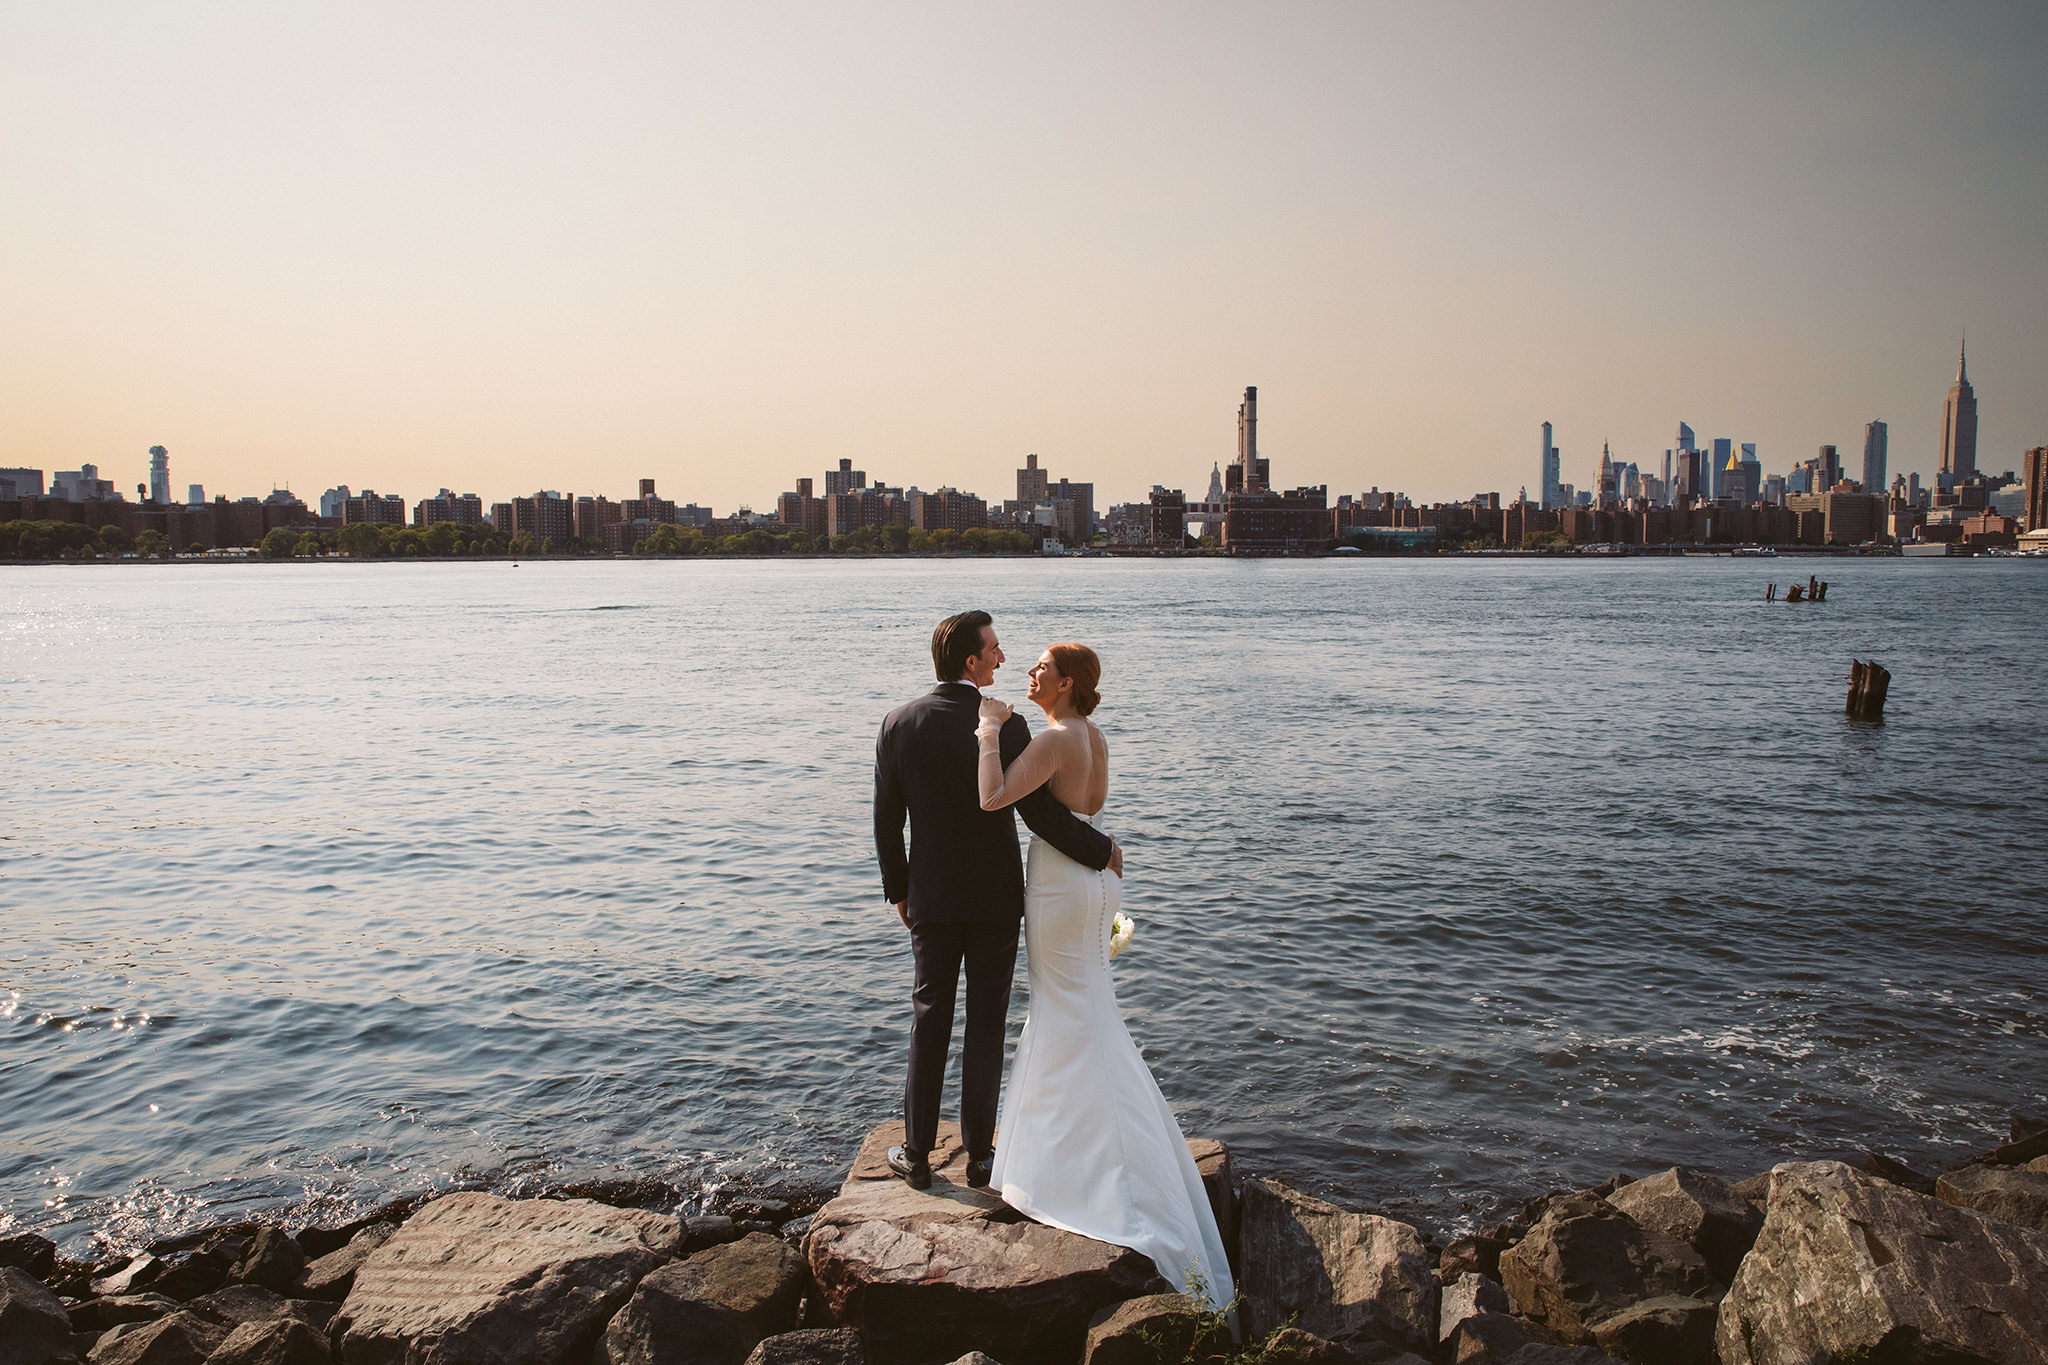 Wedding photo of a bride and groom next to the East River in New York